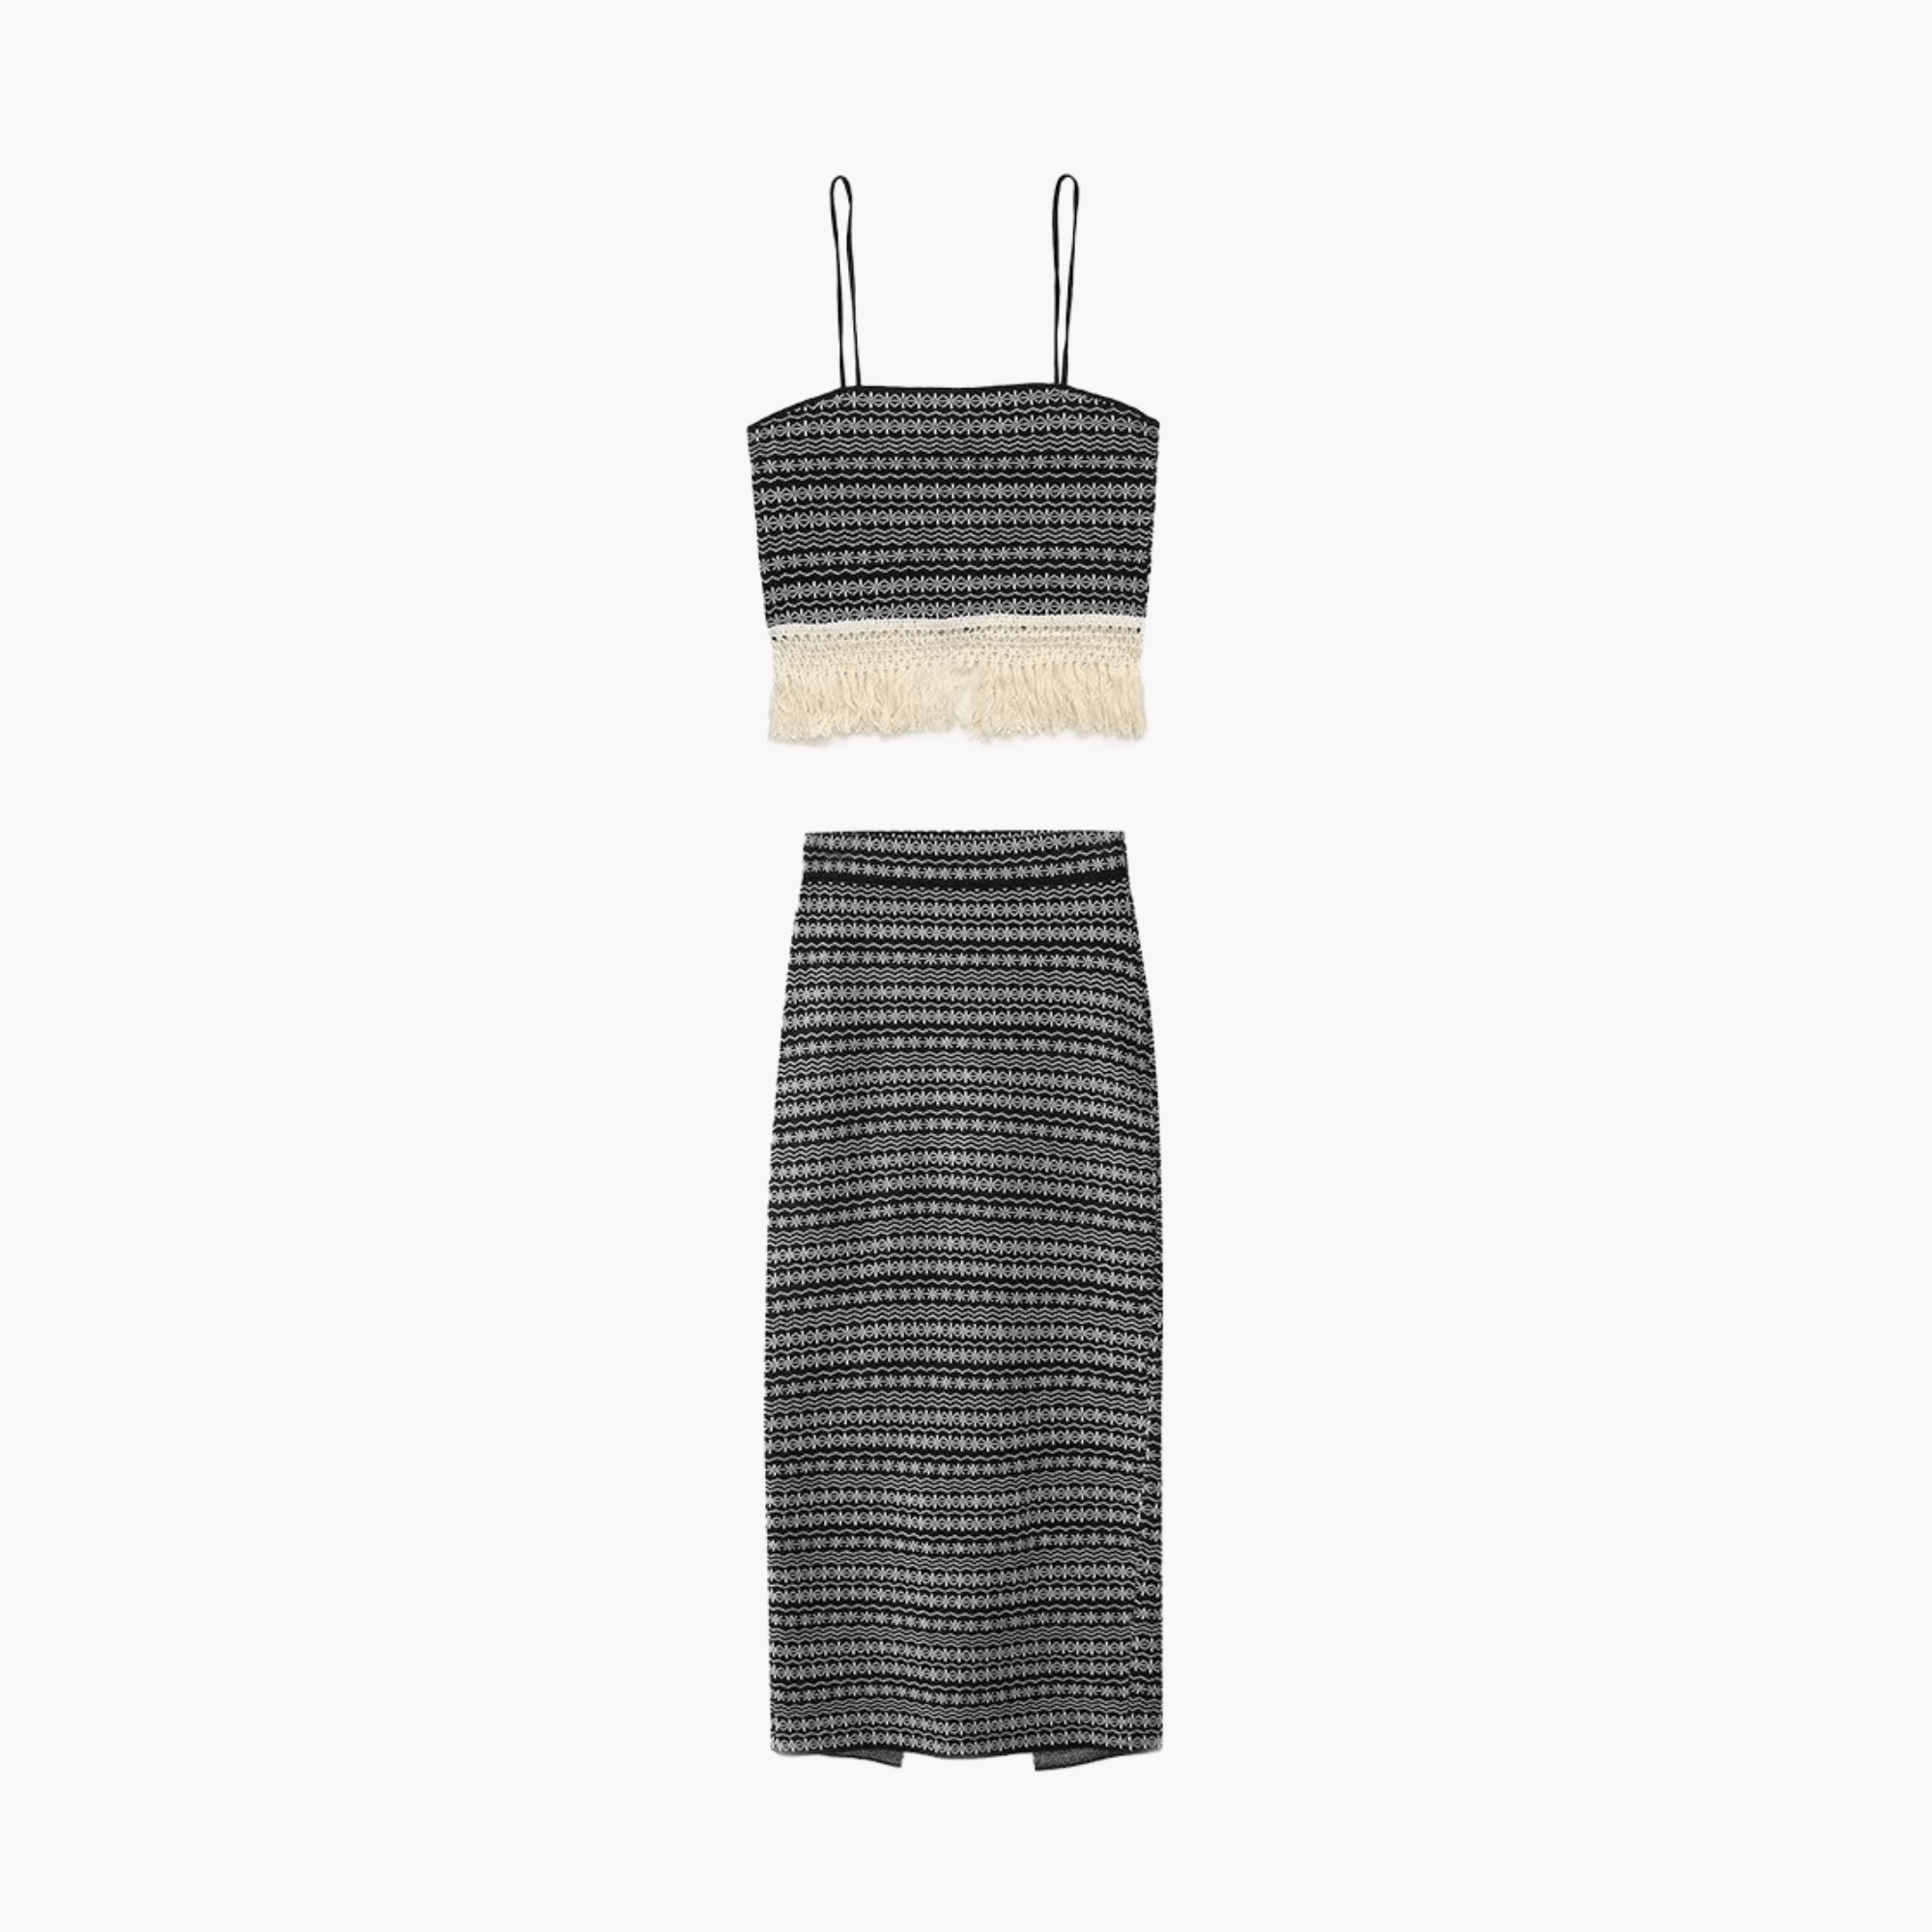 Jacquard Knitted Top and Skirt Set - Kelly Obi New York